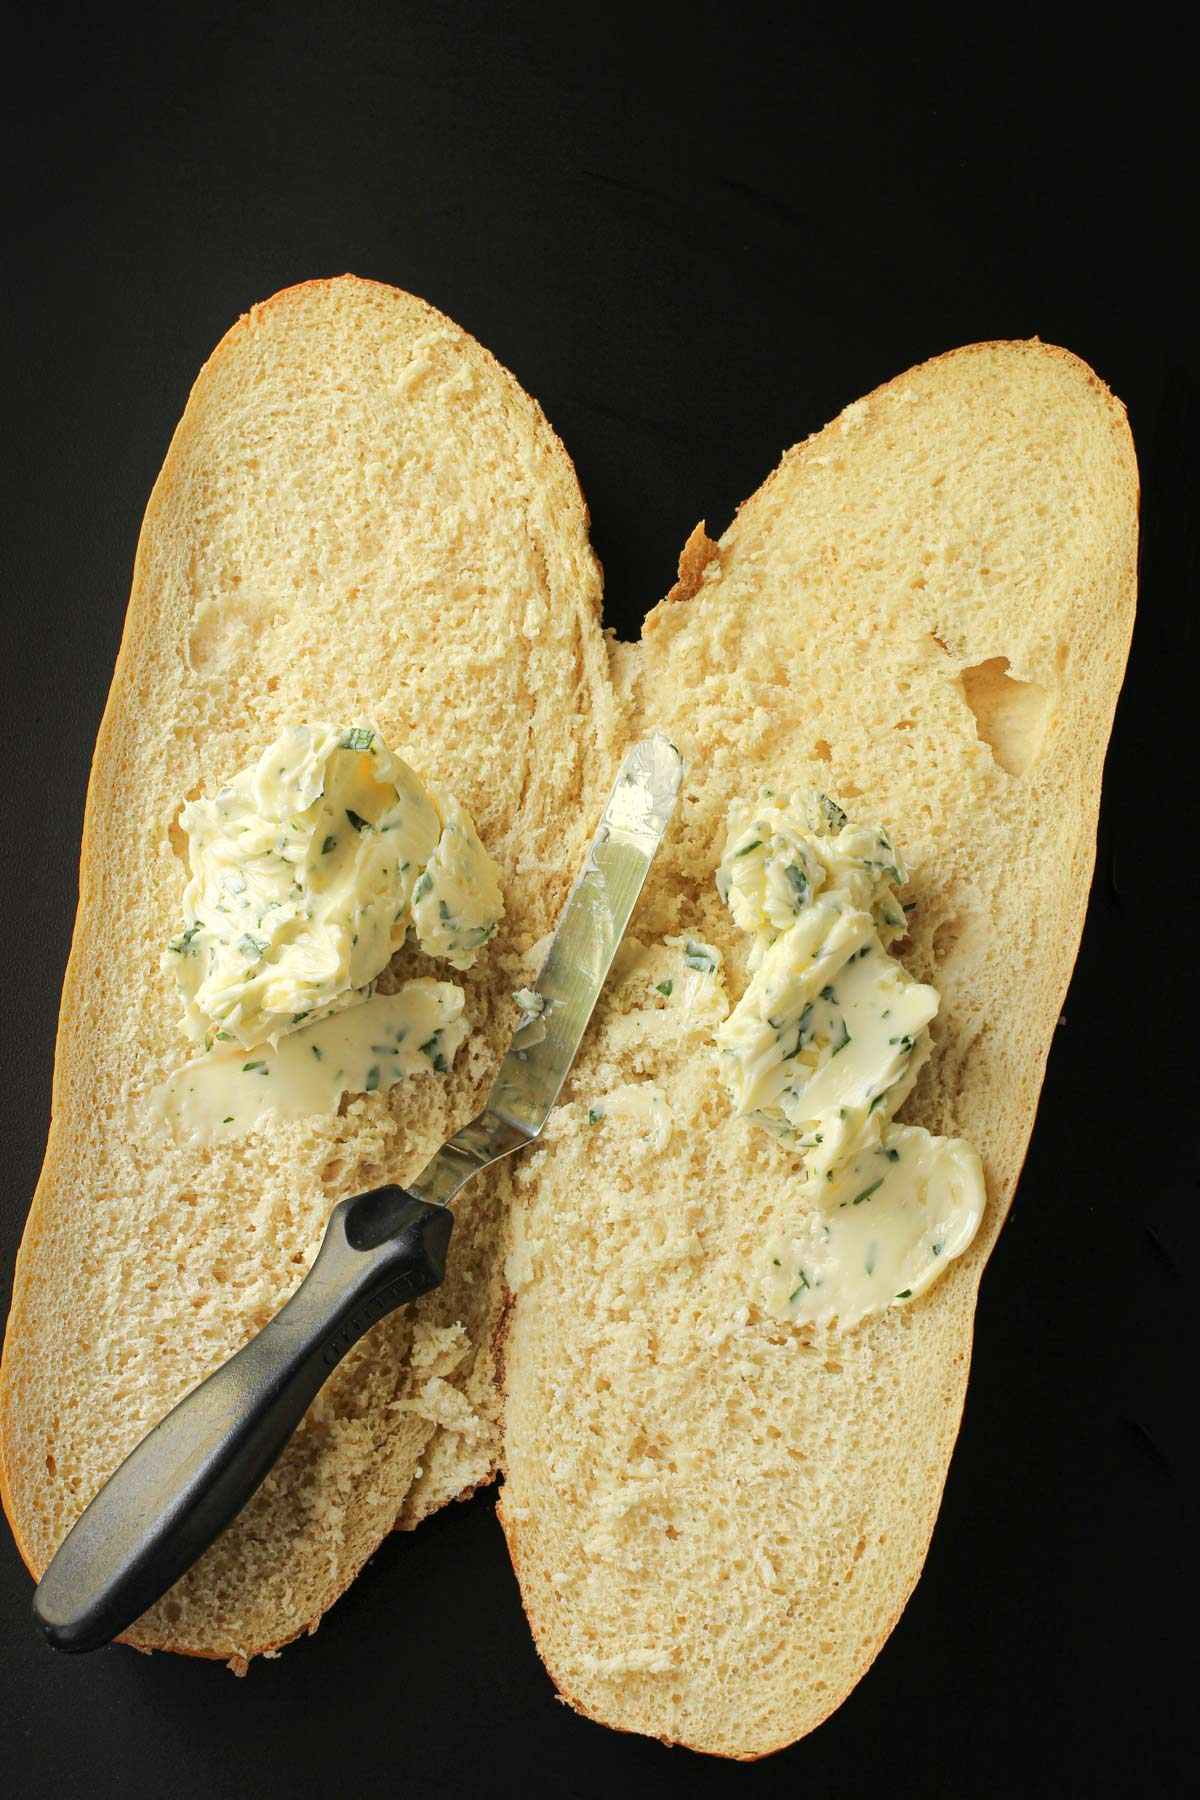 garlic butter divided between the two halves of bread.